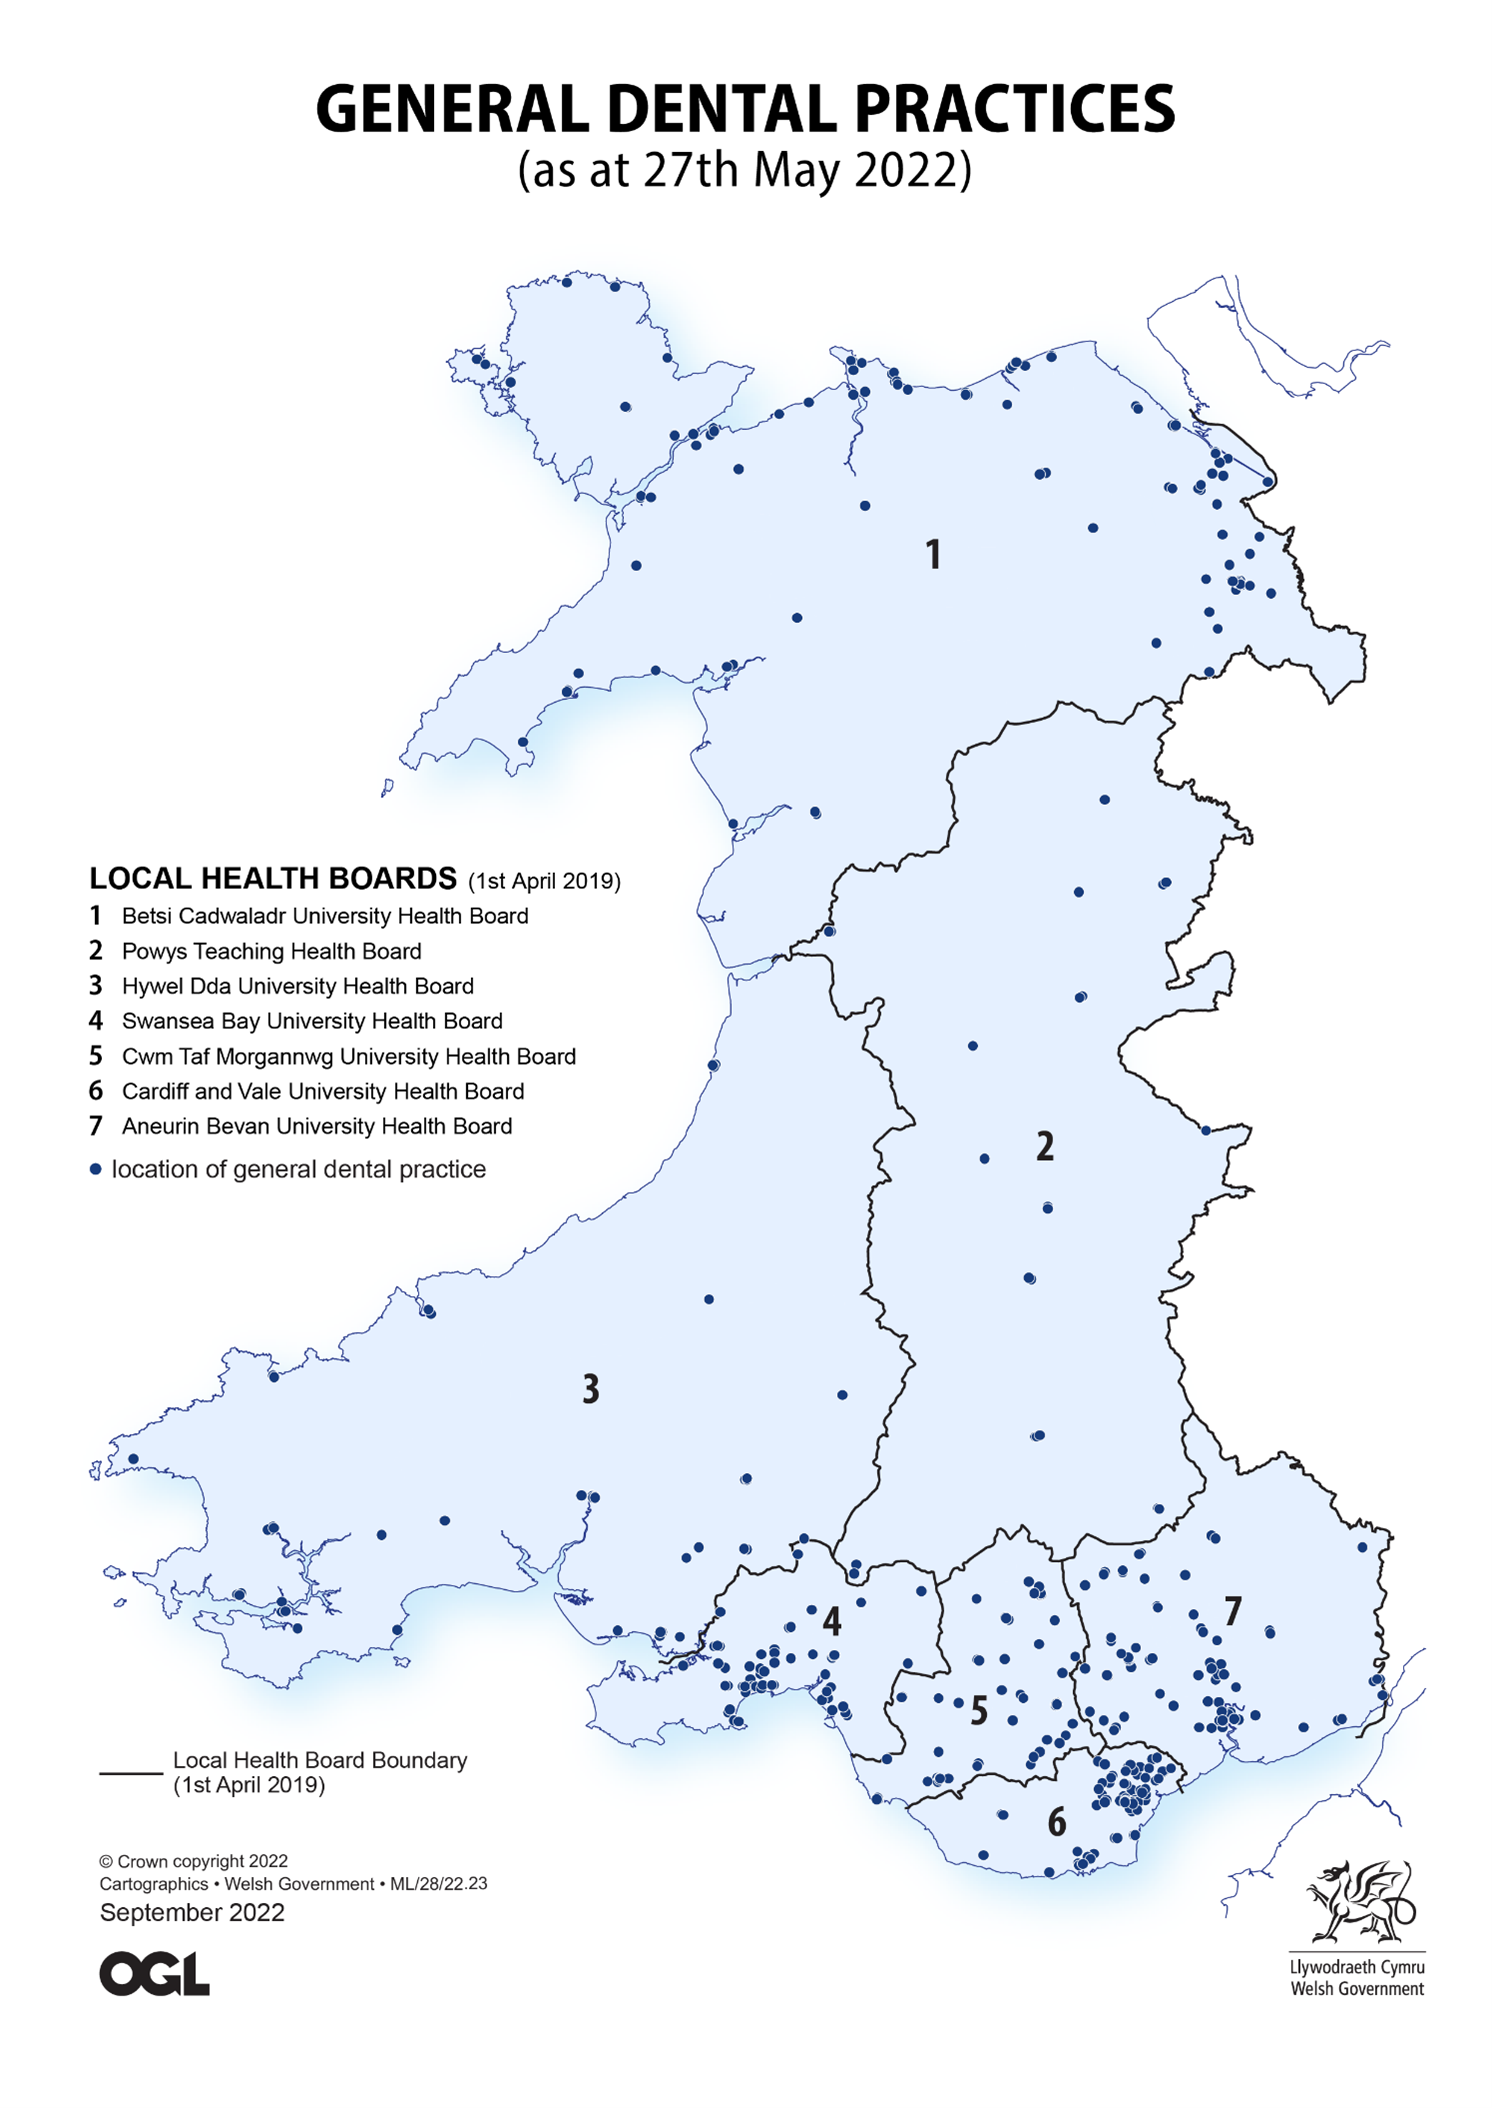 Map showing general dental practices by local health board at 27 May 2022.